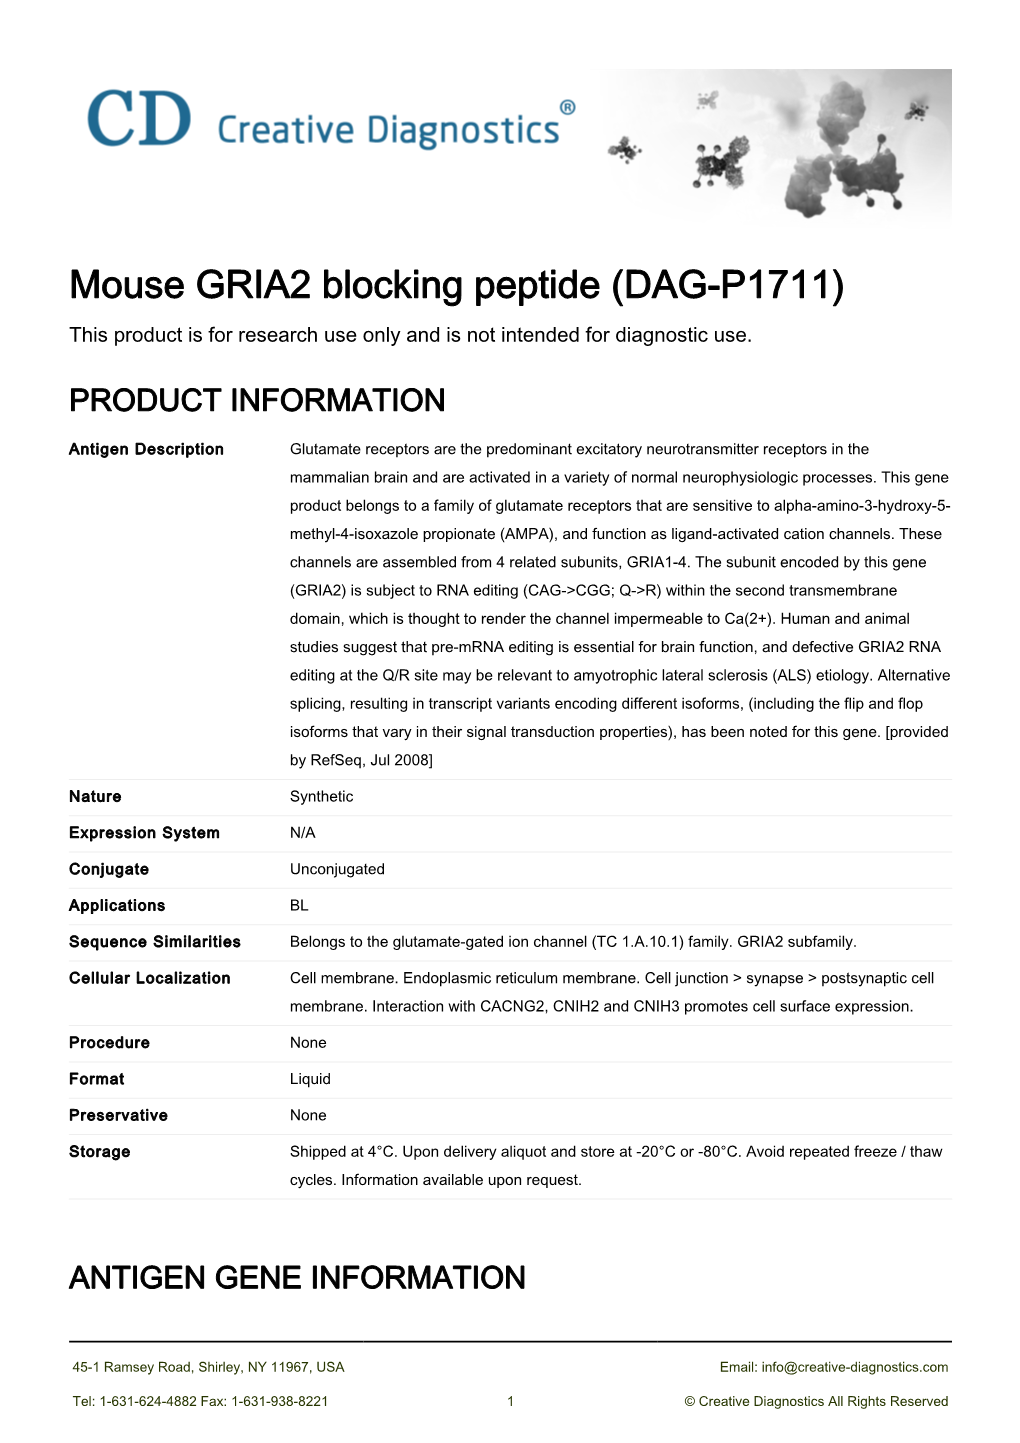 Mouse GRIA2 Blocking Peptide (DAG-P1711) This Product Is for Research Use Only and Is Not Intended for Diagnostic Use